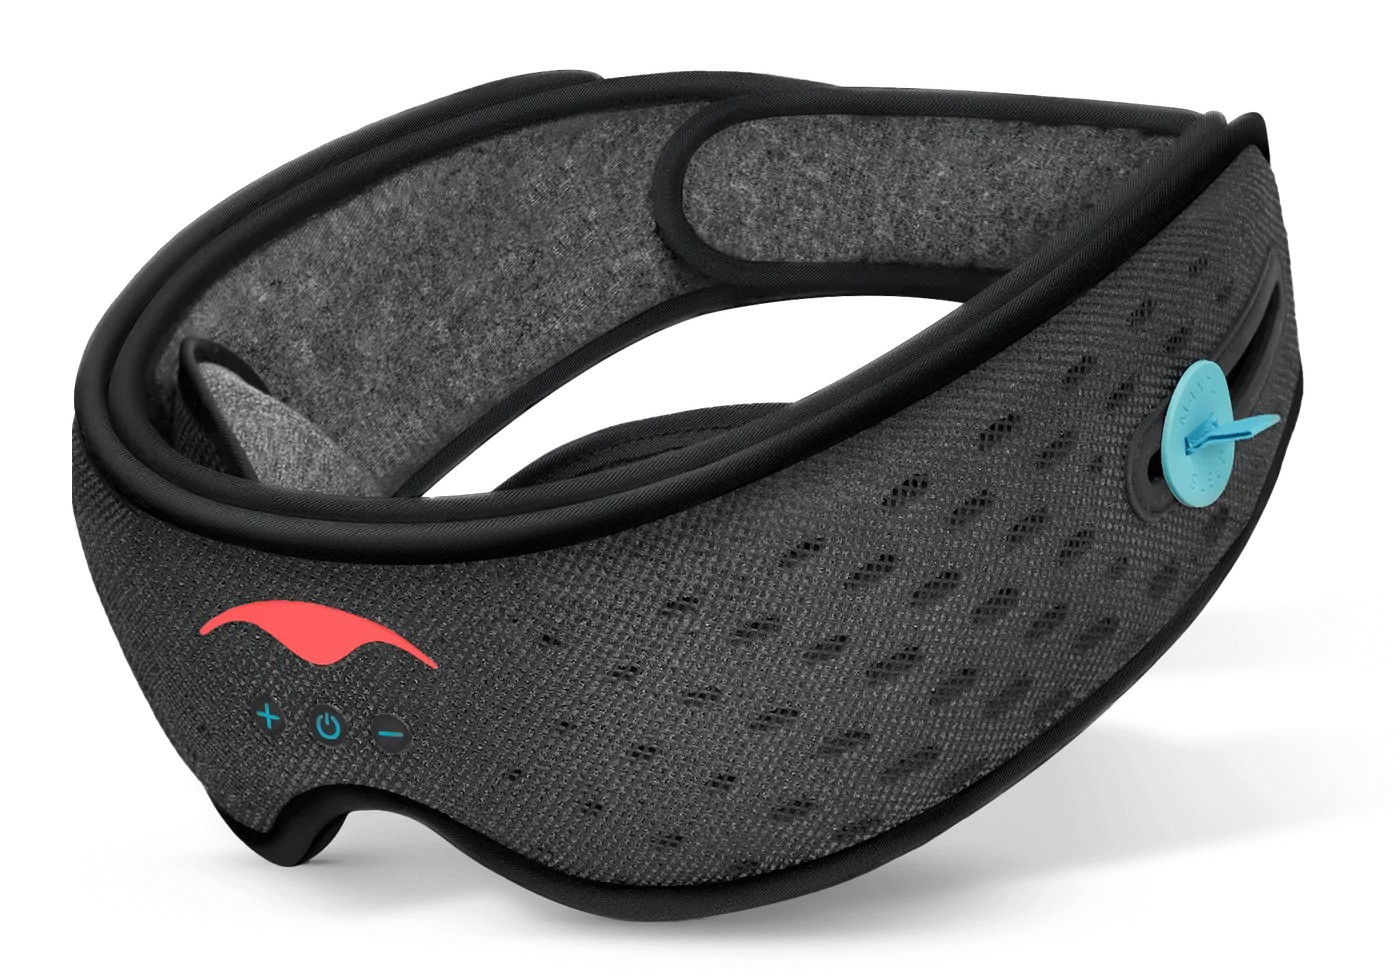 A black mesh mens sleep mask with Bluetooth speakers and eye cups.